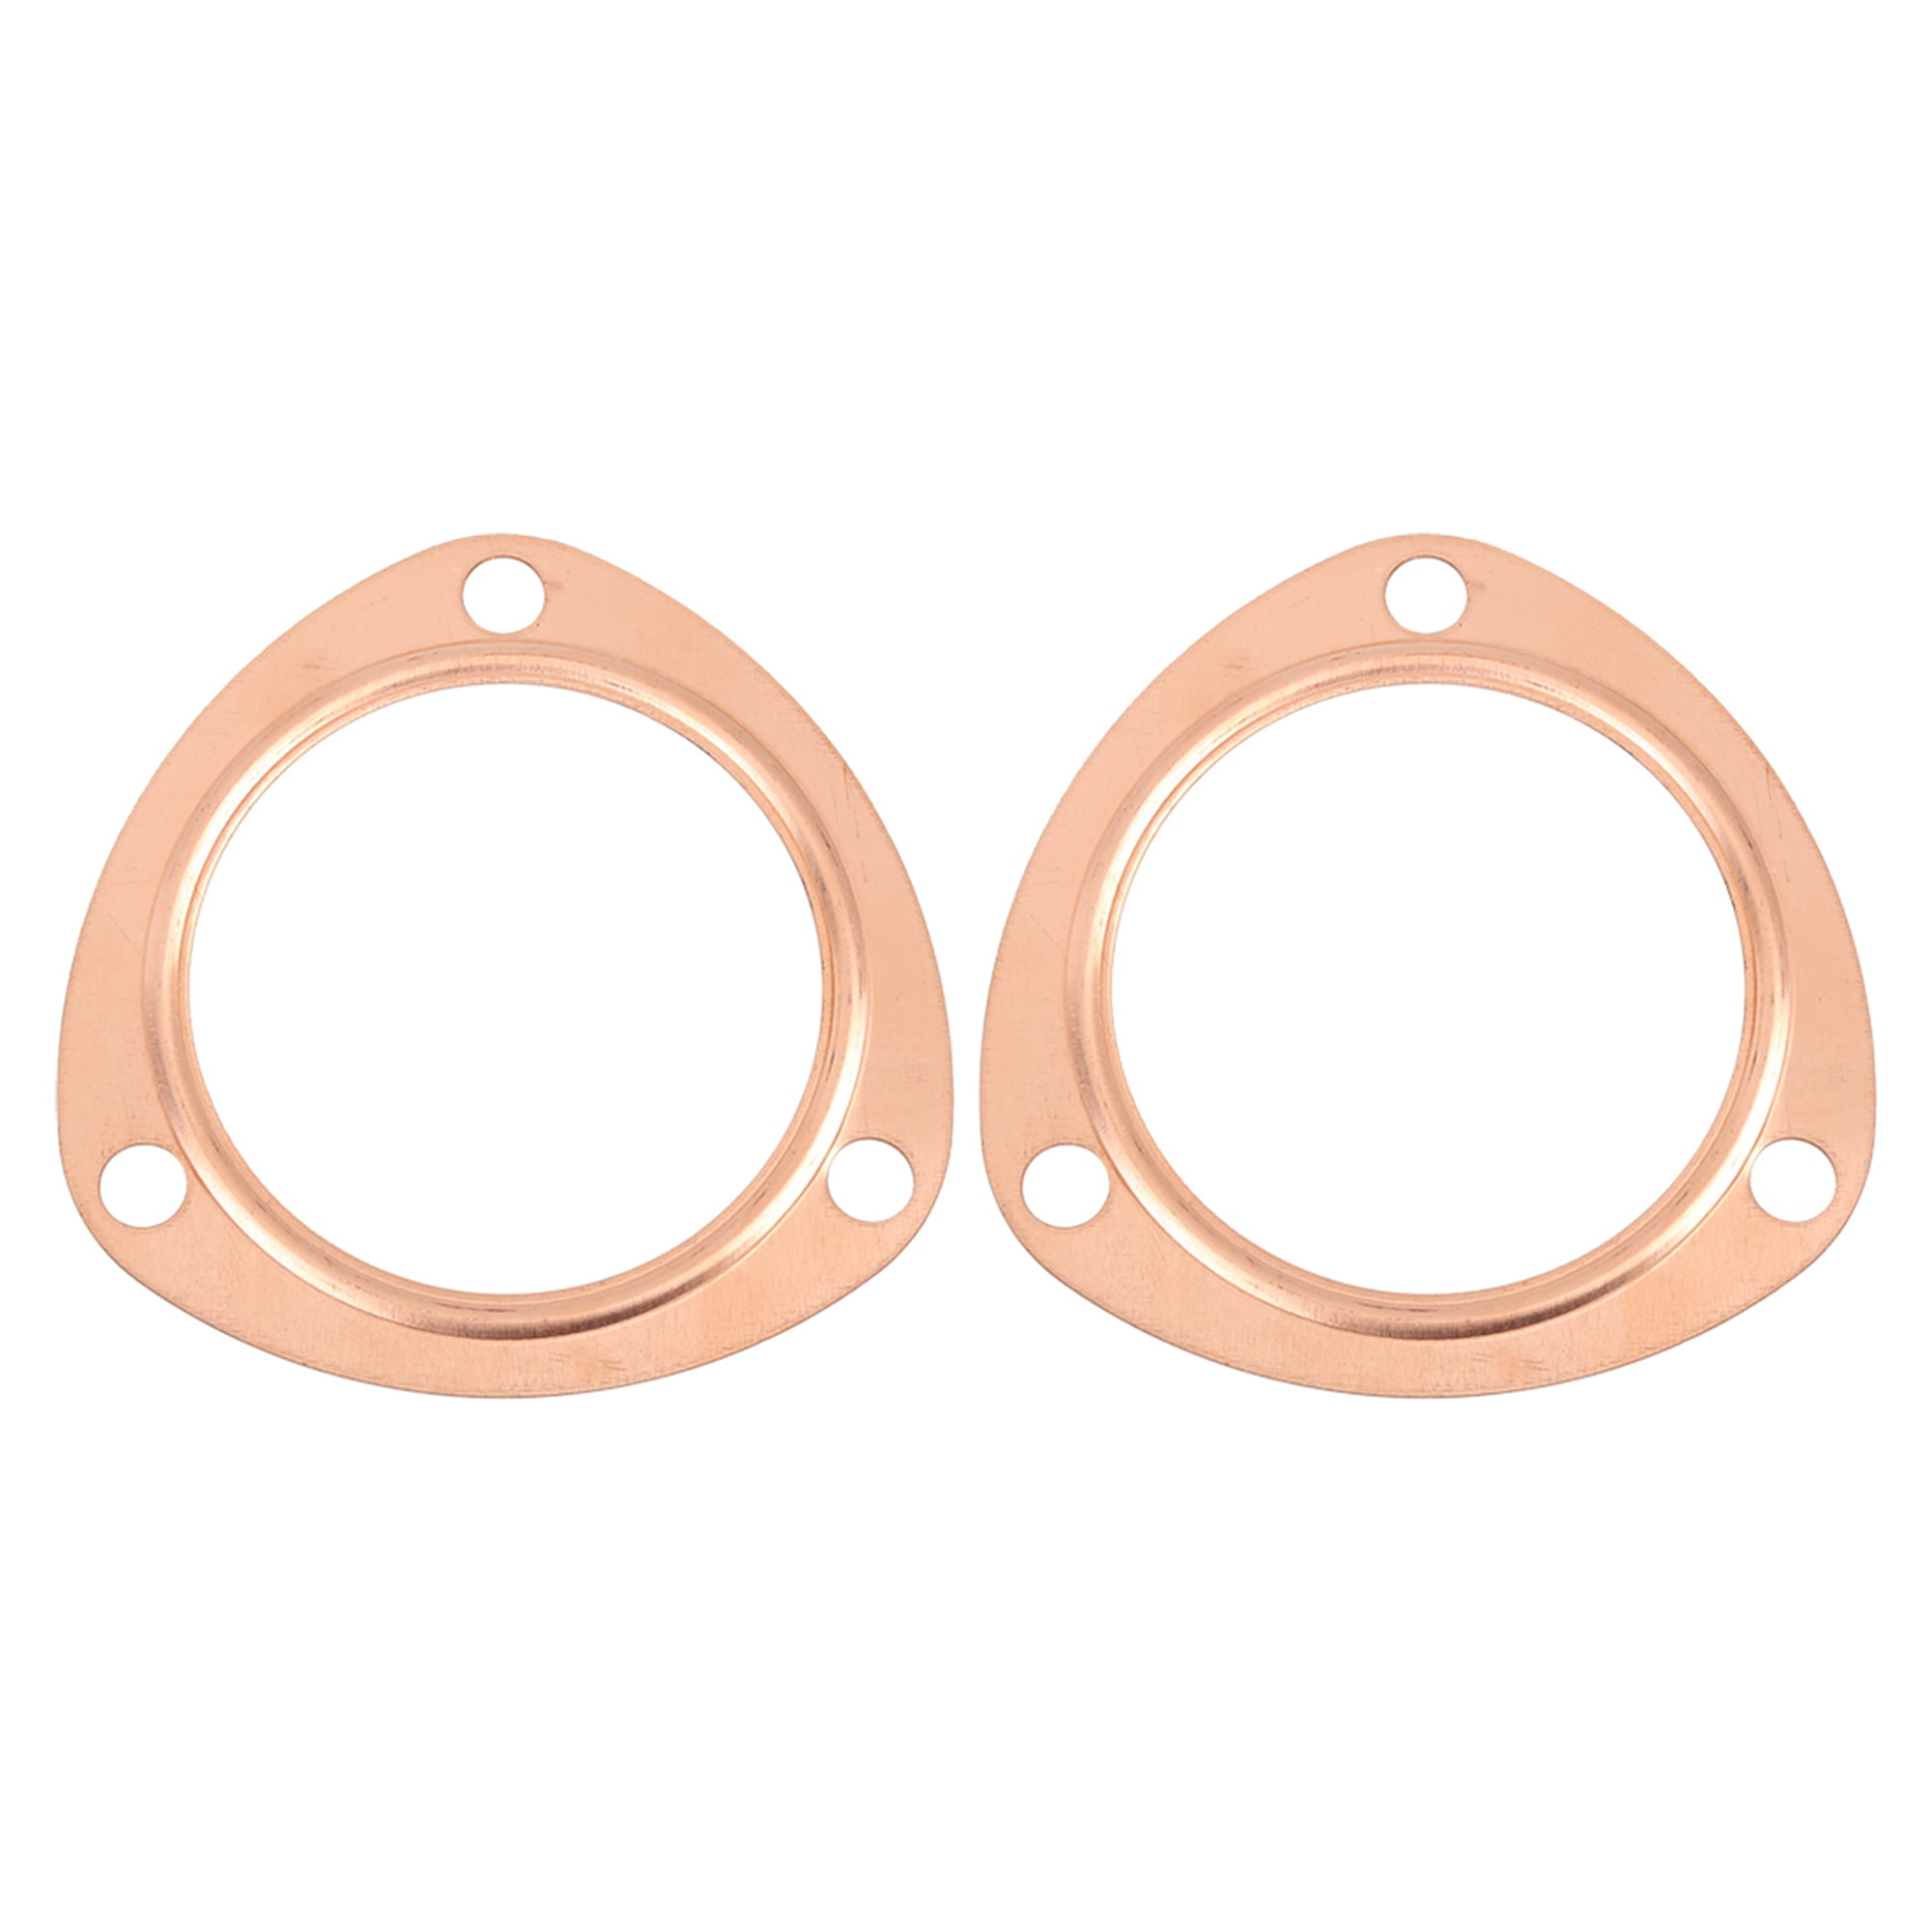 2pcs 3inch Copper Header Exhaust Collector Gaskets Reusable for SBC BBC 302 350 454 383 Exhaust Gaskets 